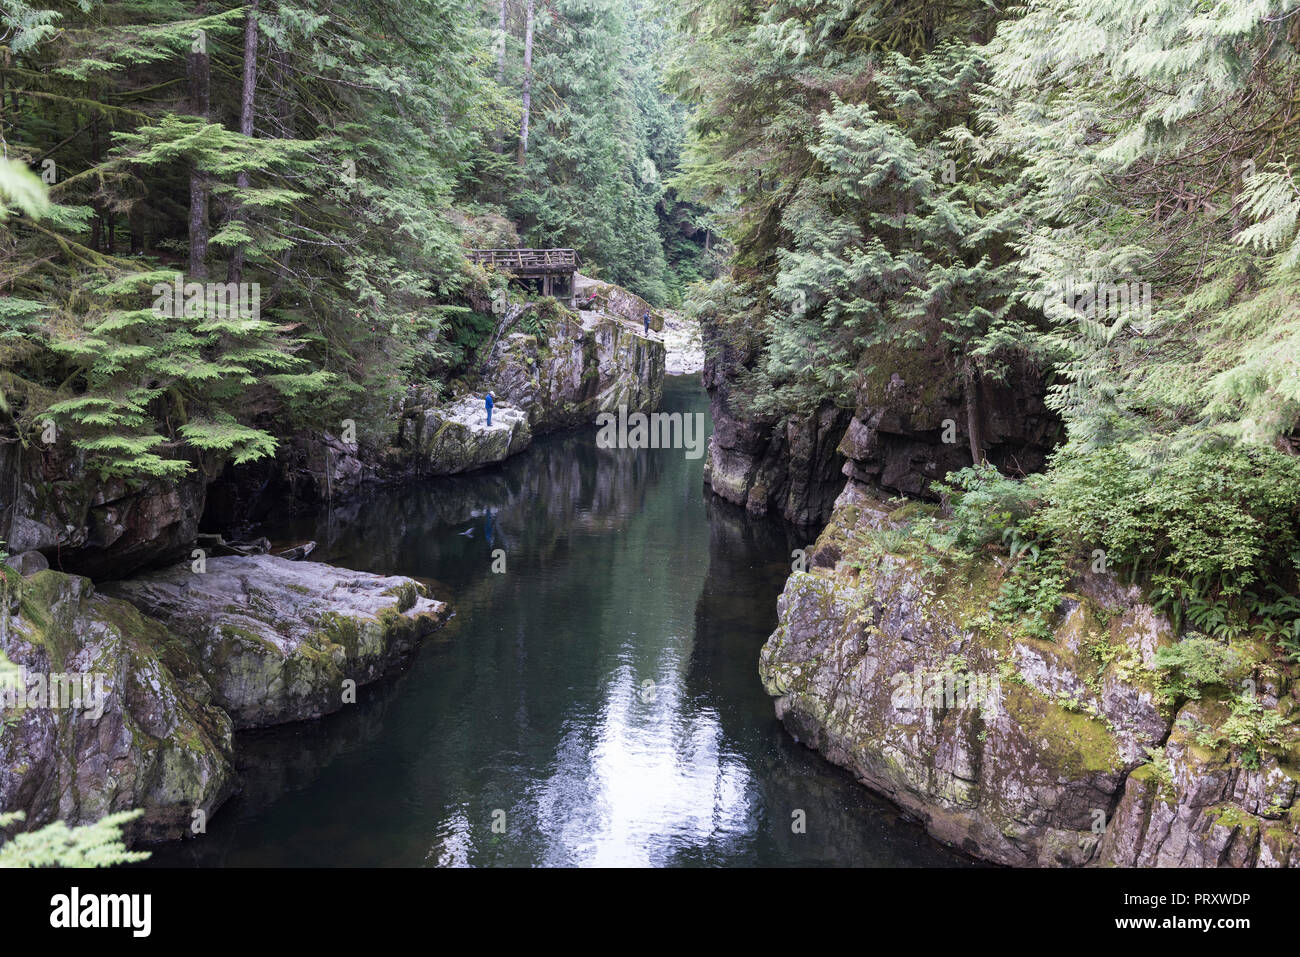 The Capilano River Cable Pool is the last stretch of water which allows sports fishing before the Fish Hatchery, North Vancouver British Columbia. Stock Photo